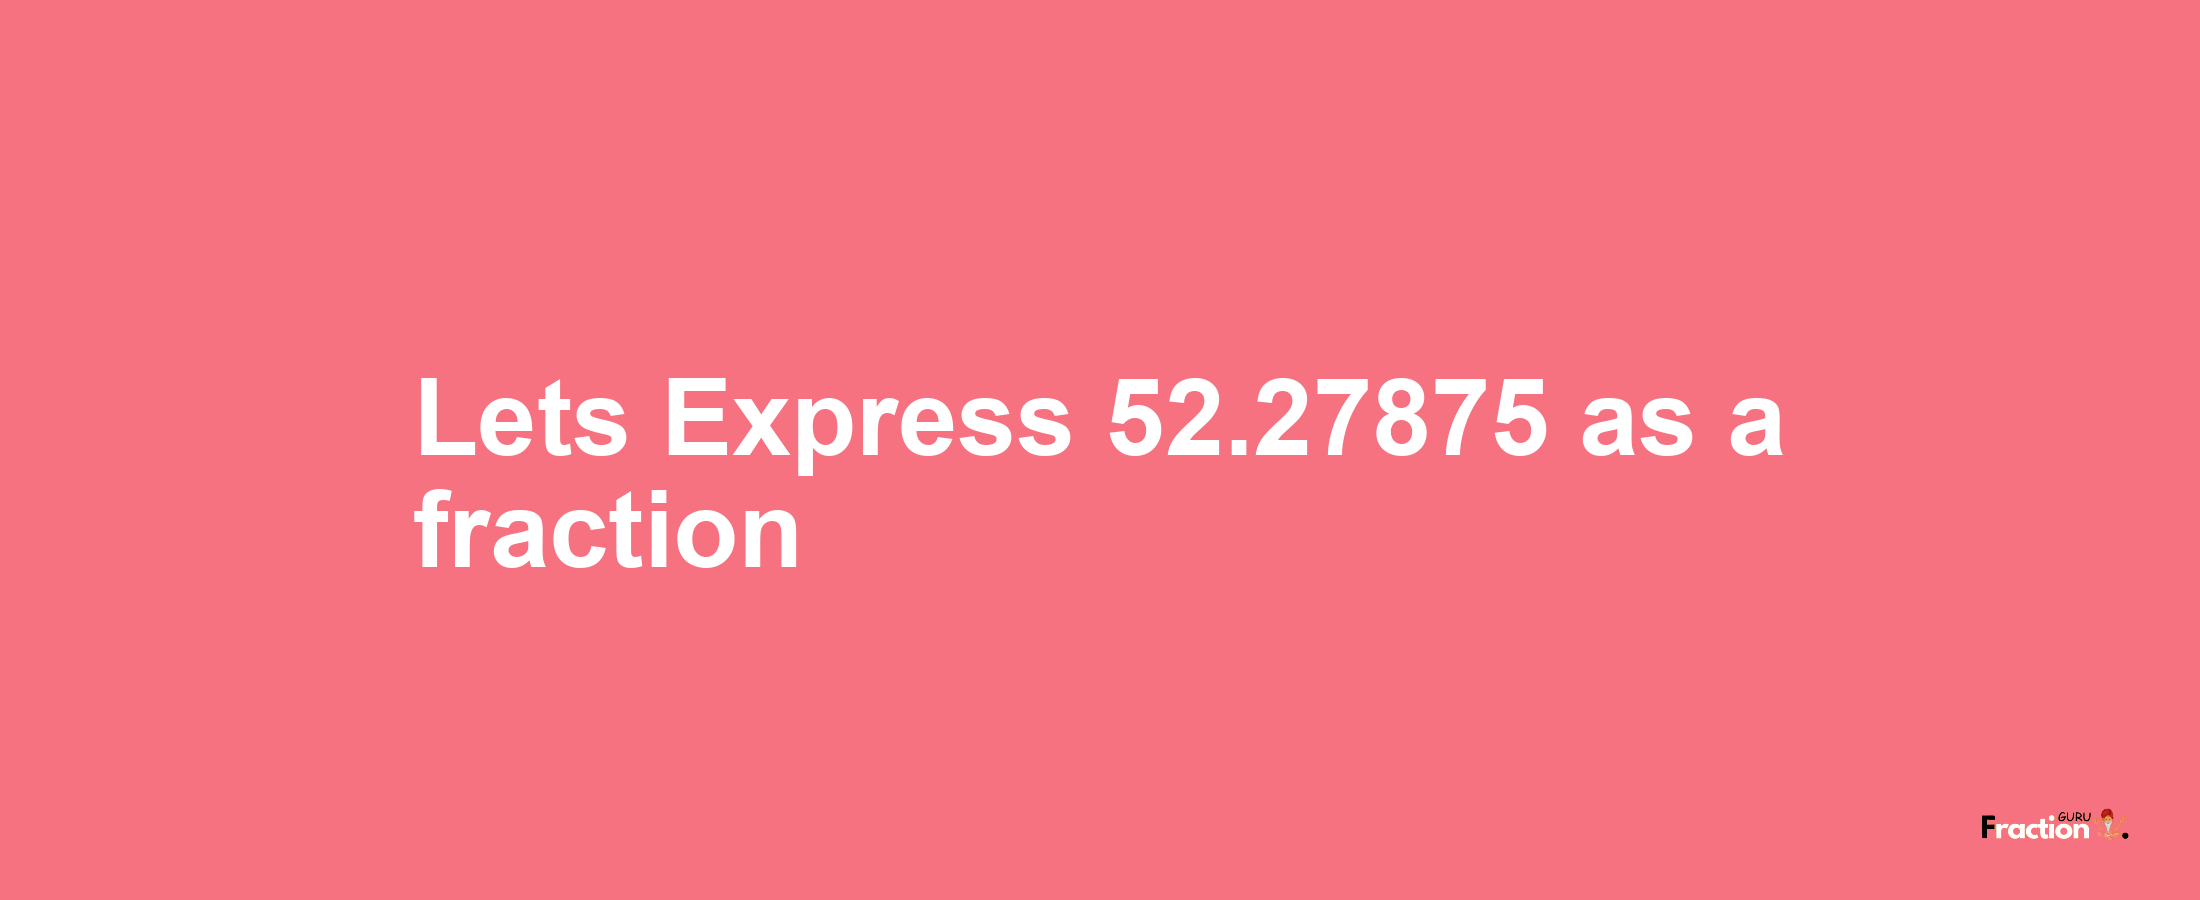 Lets Express 52.27875 as afraction